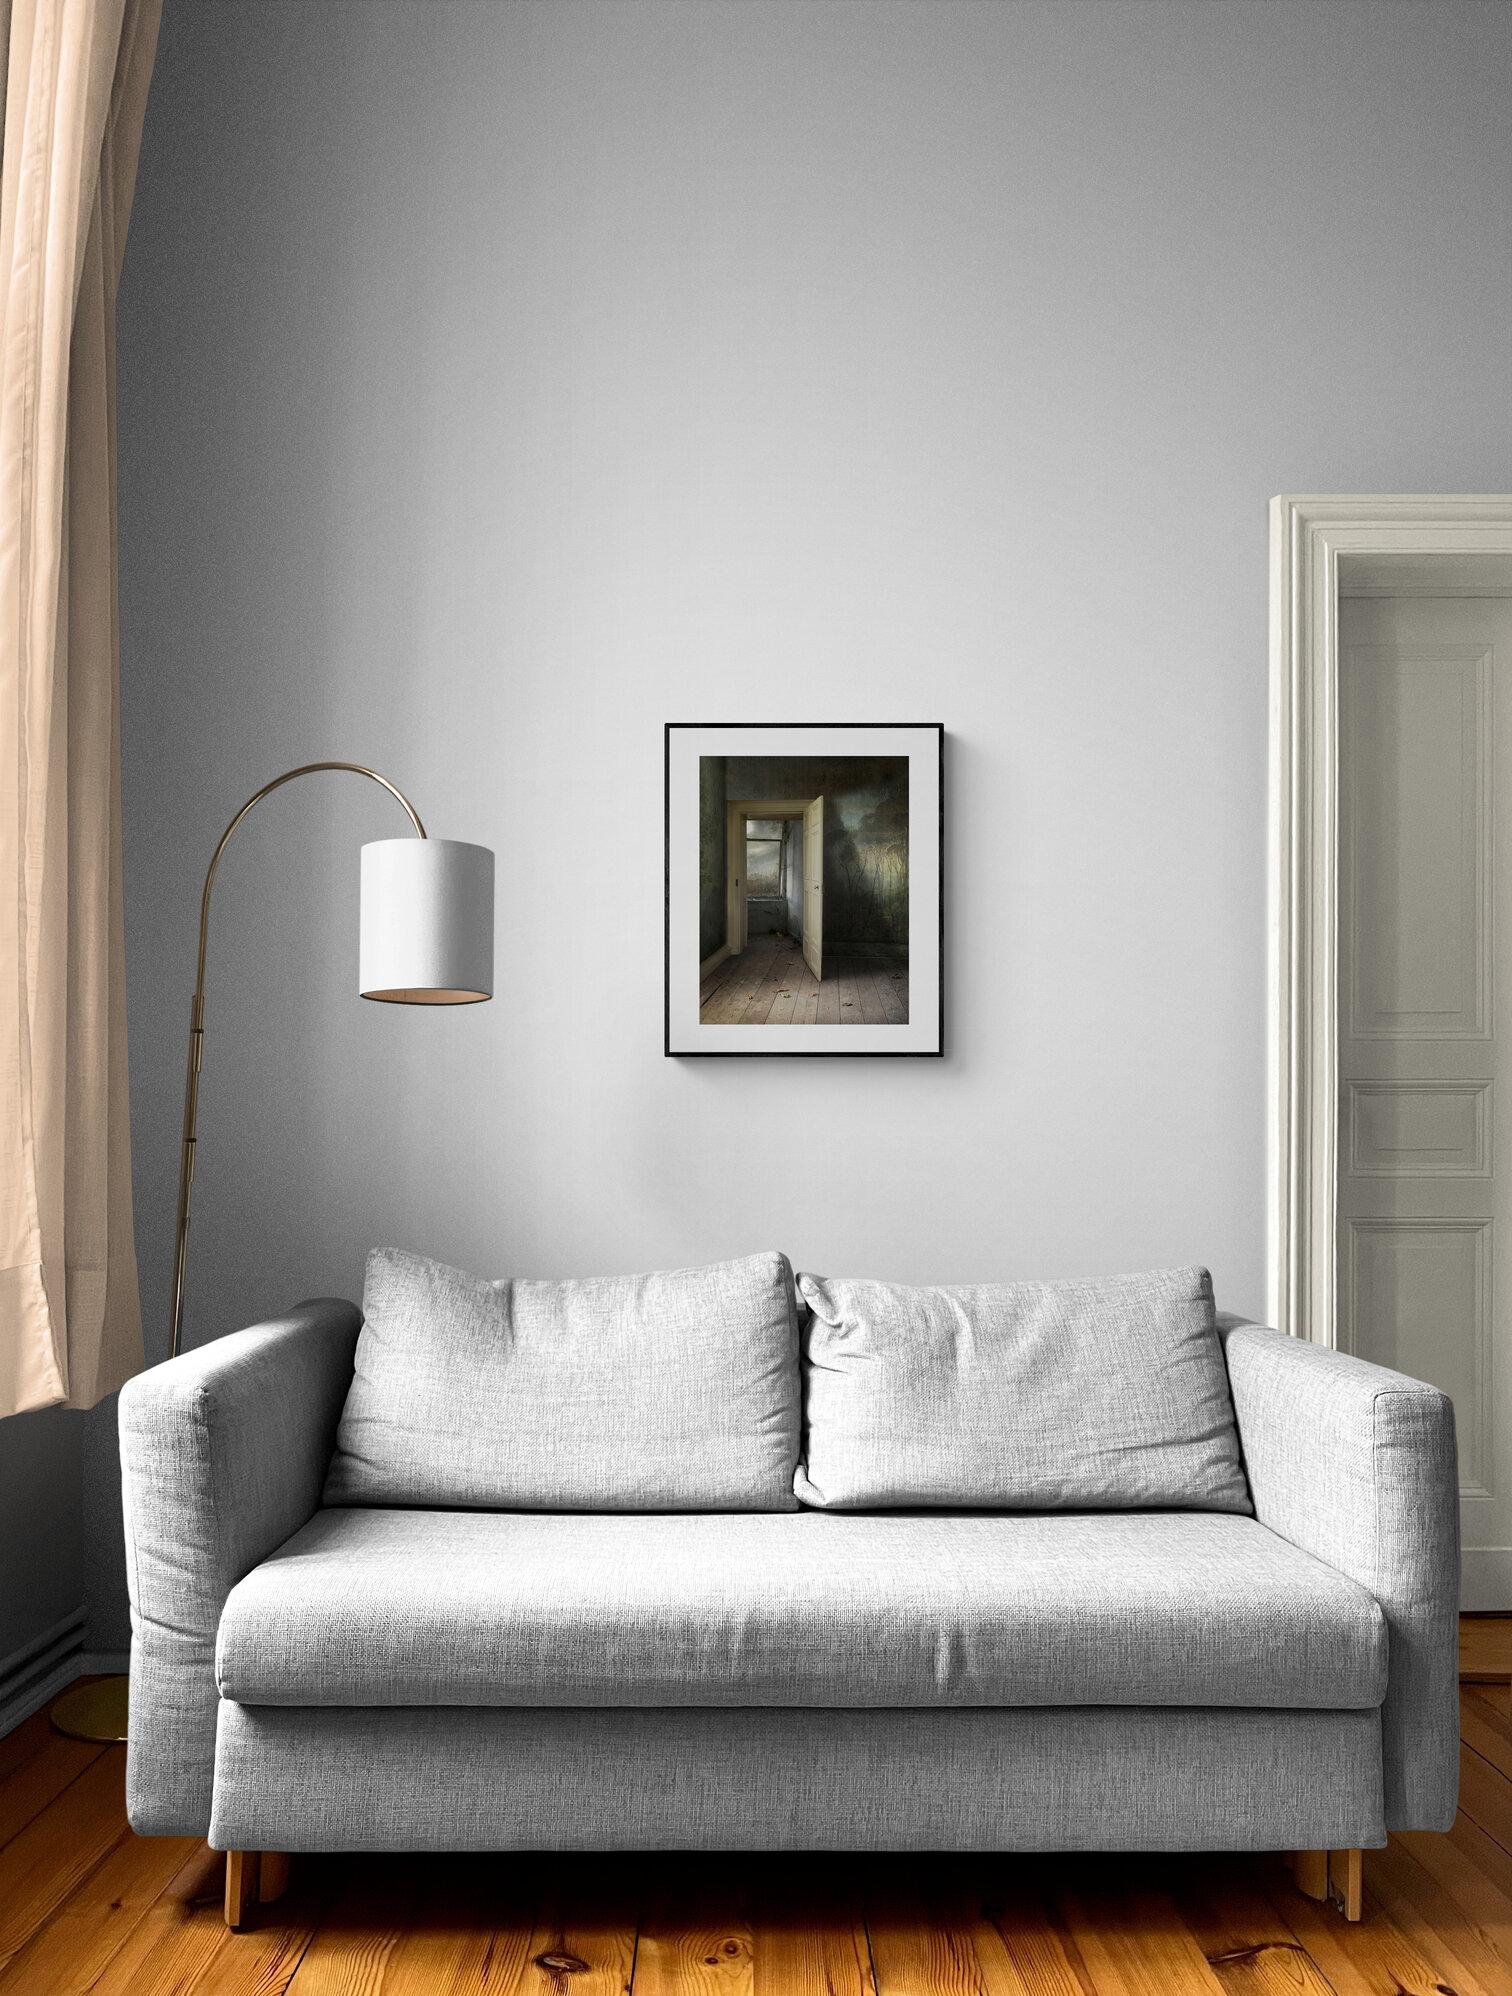 Interior With Open Door - Photomontage, Archival Pigment Print, Interiors - Contemporary Photograph by Suzanne Moxhay